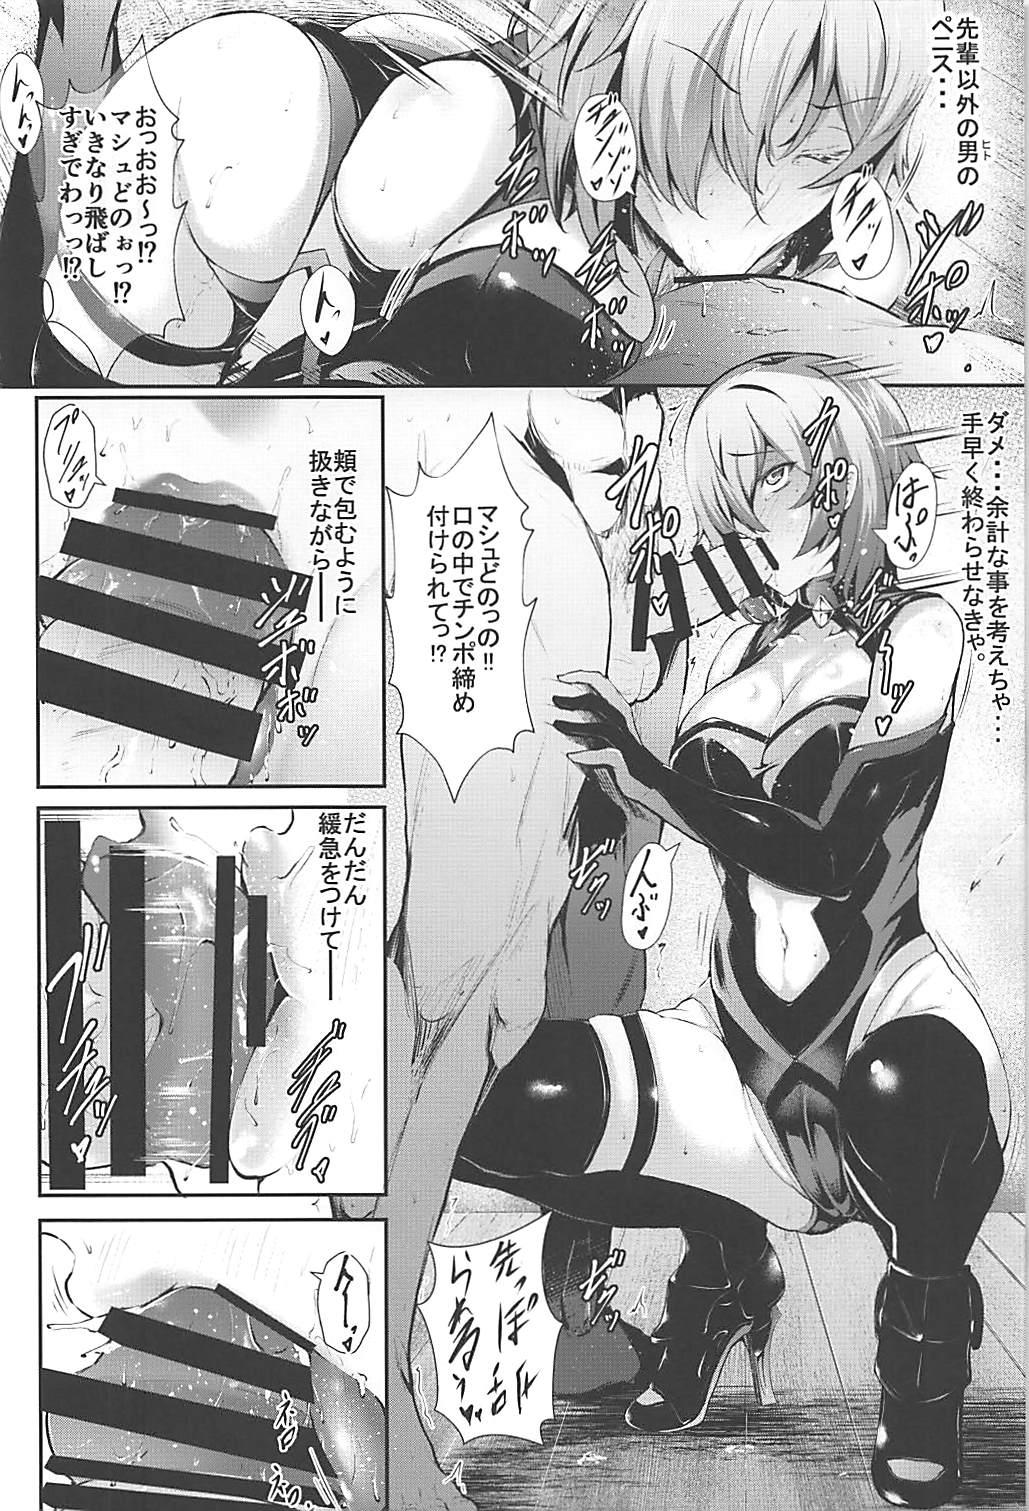 Maid Nympho-mania? - Fate grand order Busty - Page 7